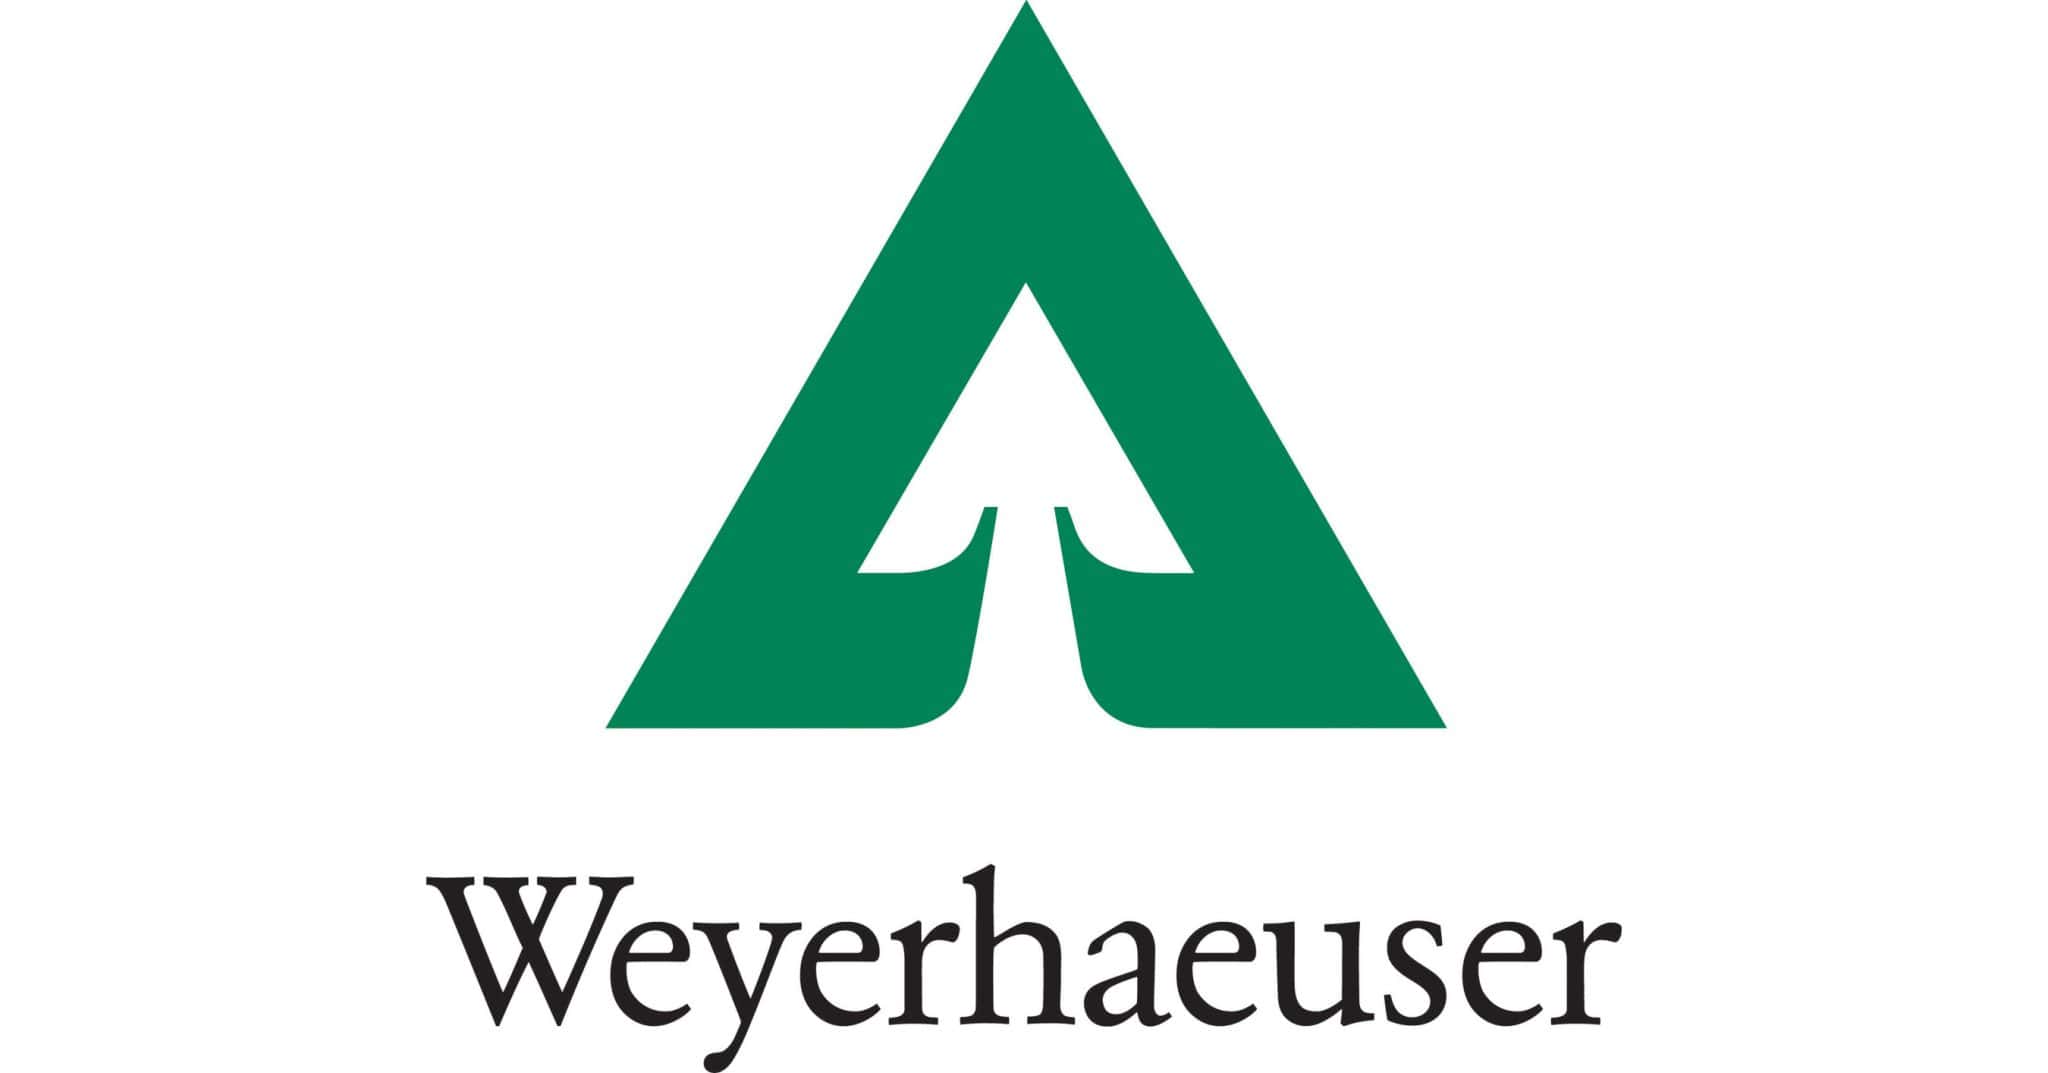 Weyerhaeuser Approved For 1st Carbon Credit Project In Maine